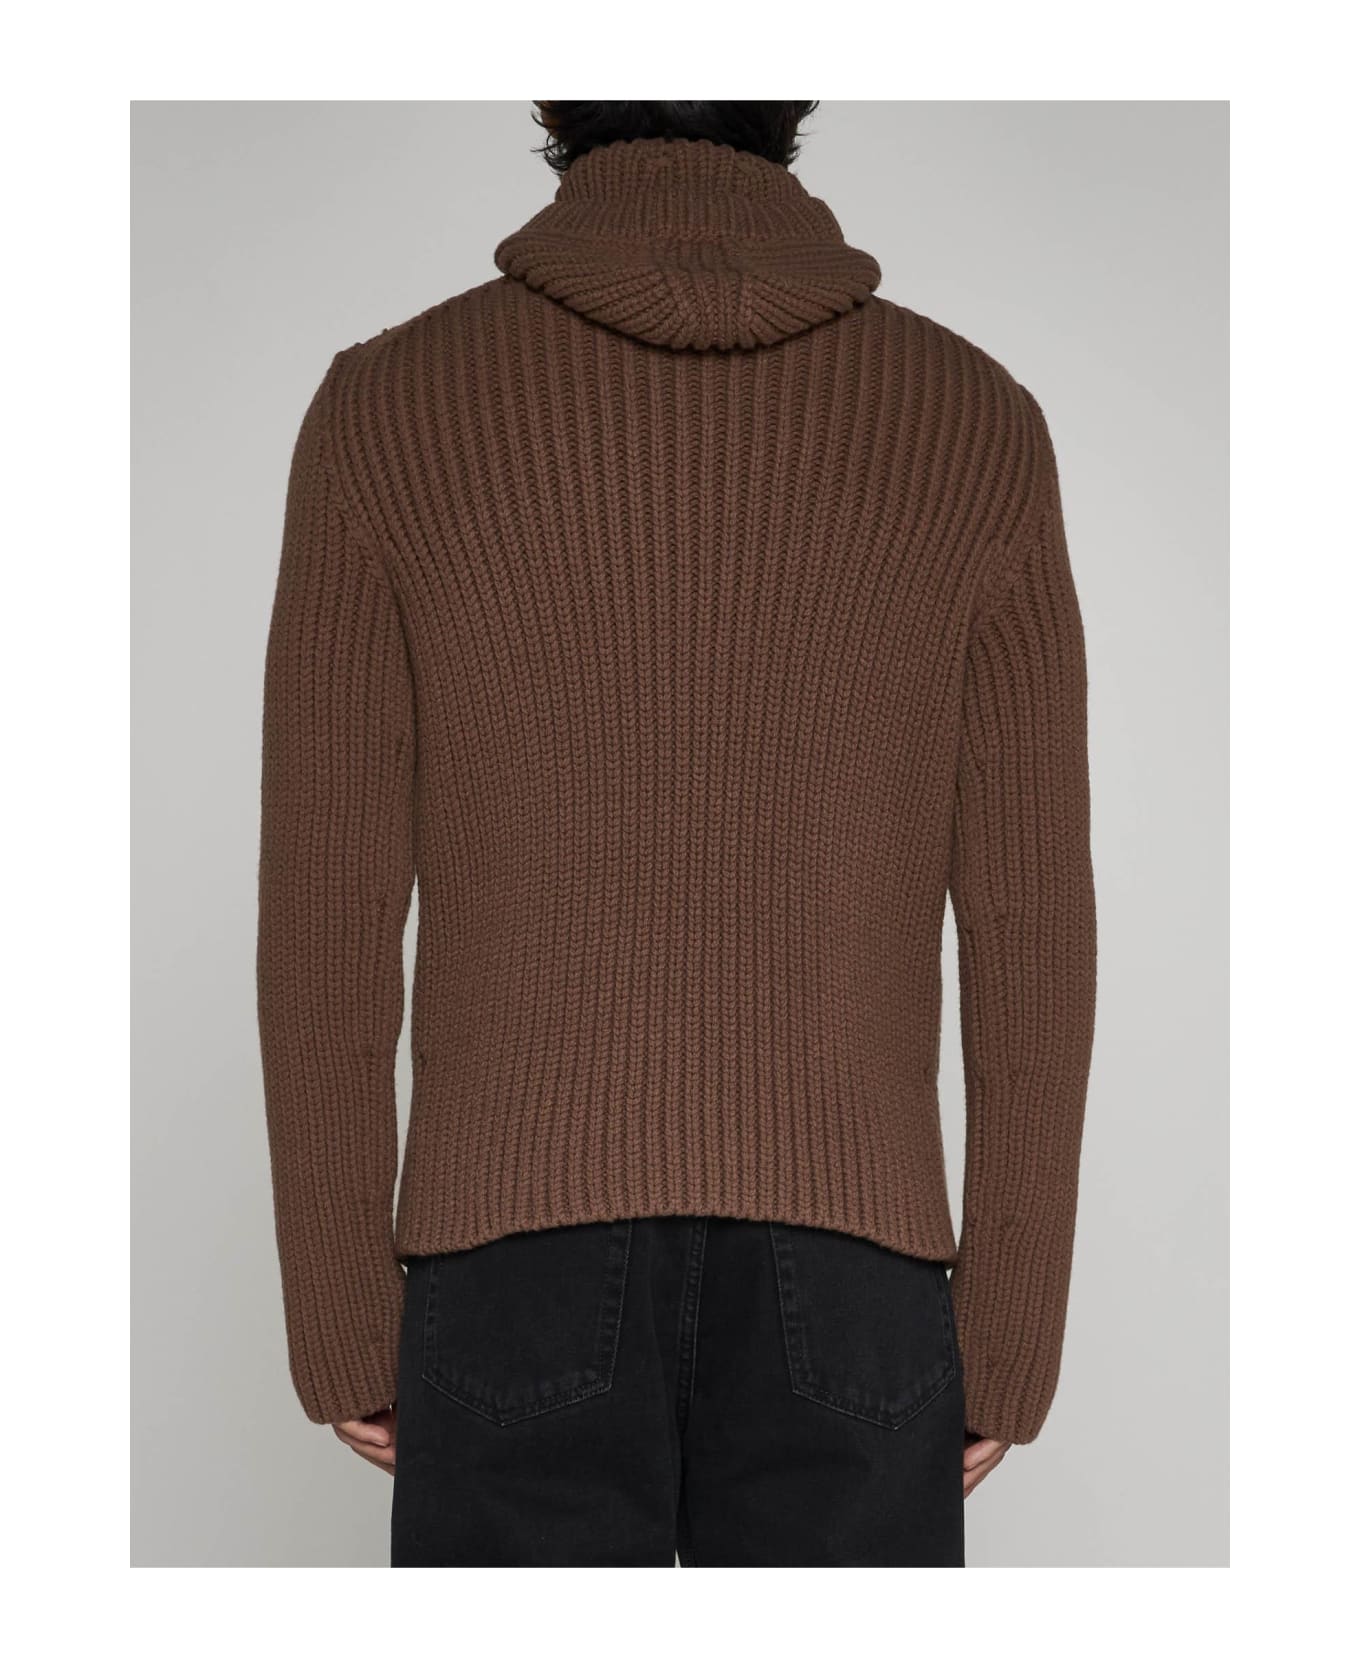 Lanvin Wool And Cashmere Hooded Sweater - Chestnut ニットウェア